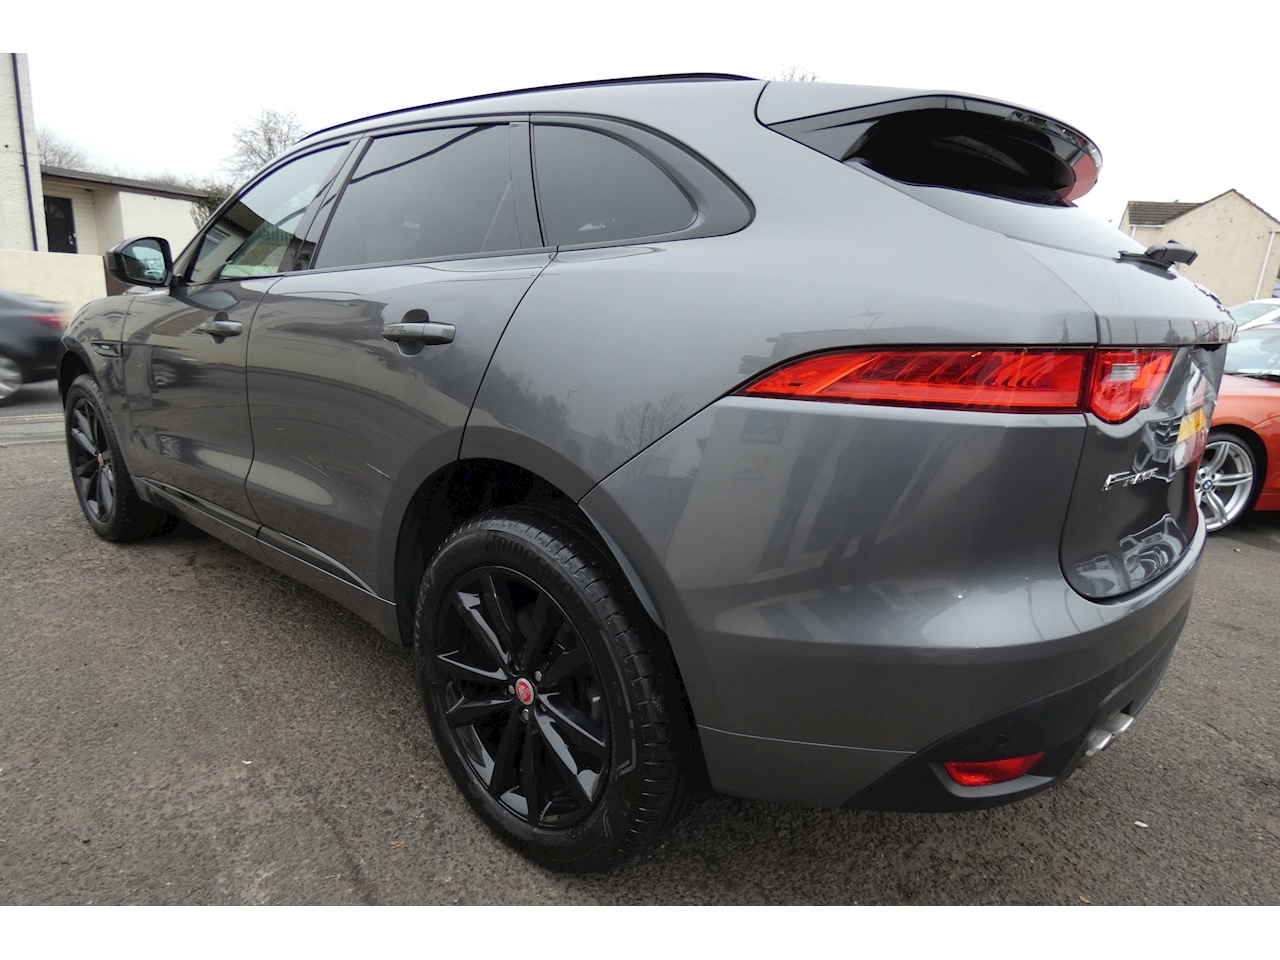 2.0d R-Sport SUV 5dr Diesel Auto (s/s) (180 ps)